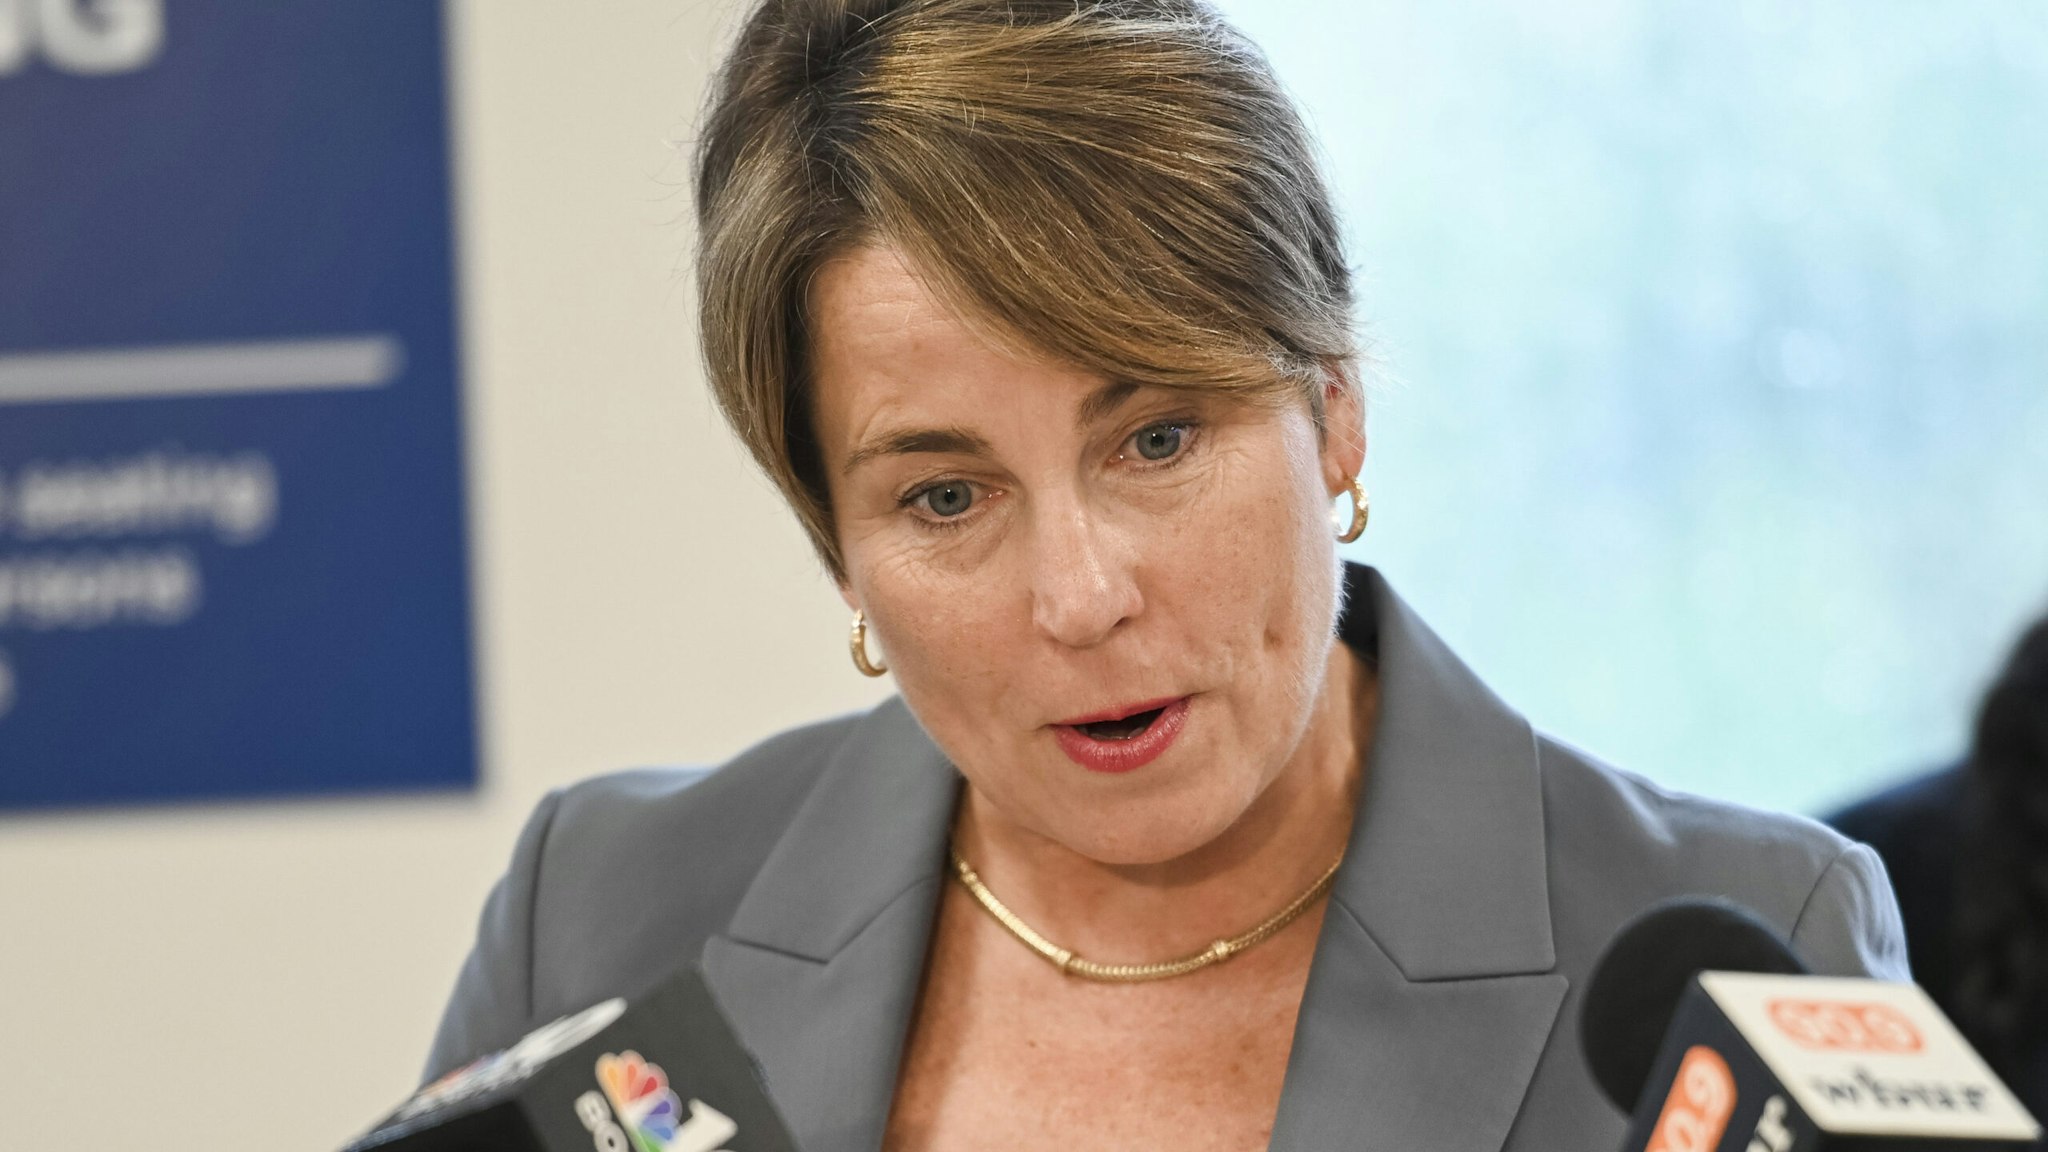 Boston, MA - July 10: Massachusetts Governor Maura Healey speaks to members of the press at a visit and press conference by the Governor at the Haymarket Registry of Motor Vehicles. The RMV is implementing a 2022 law granting access to driver's licenses to eligible undocumented immigrants.